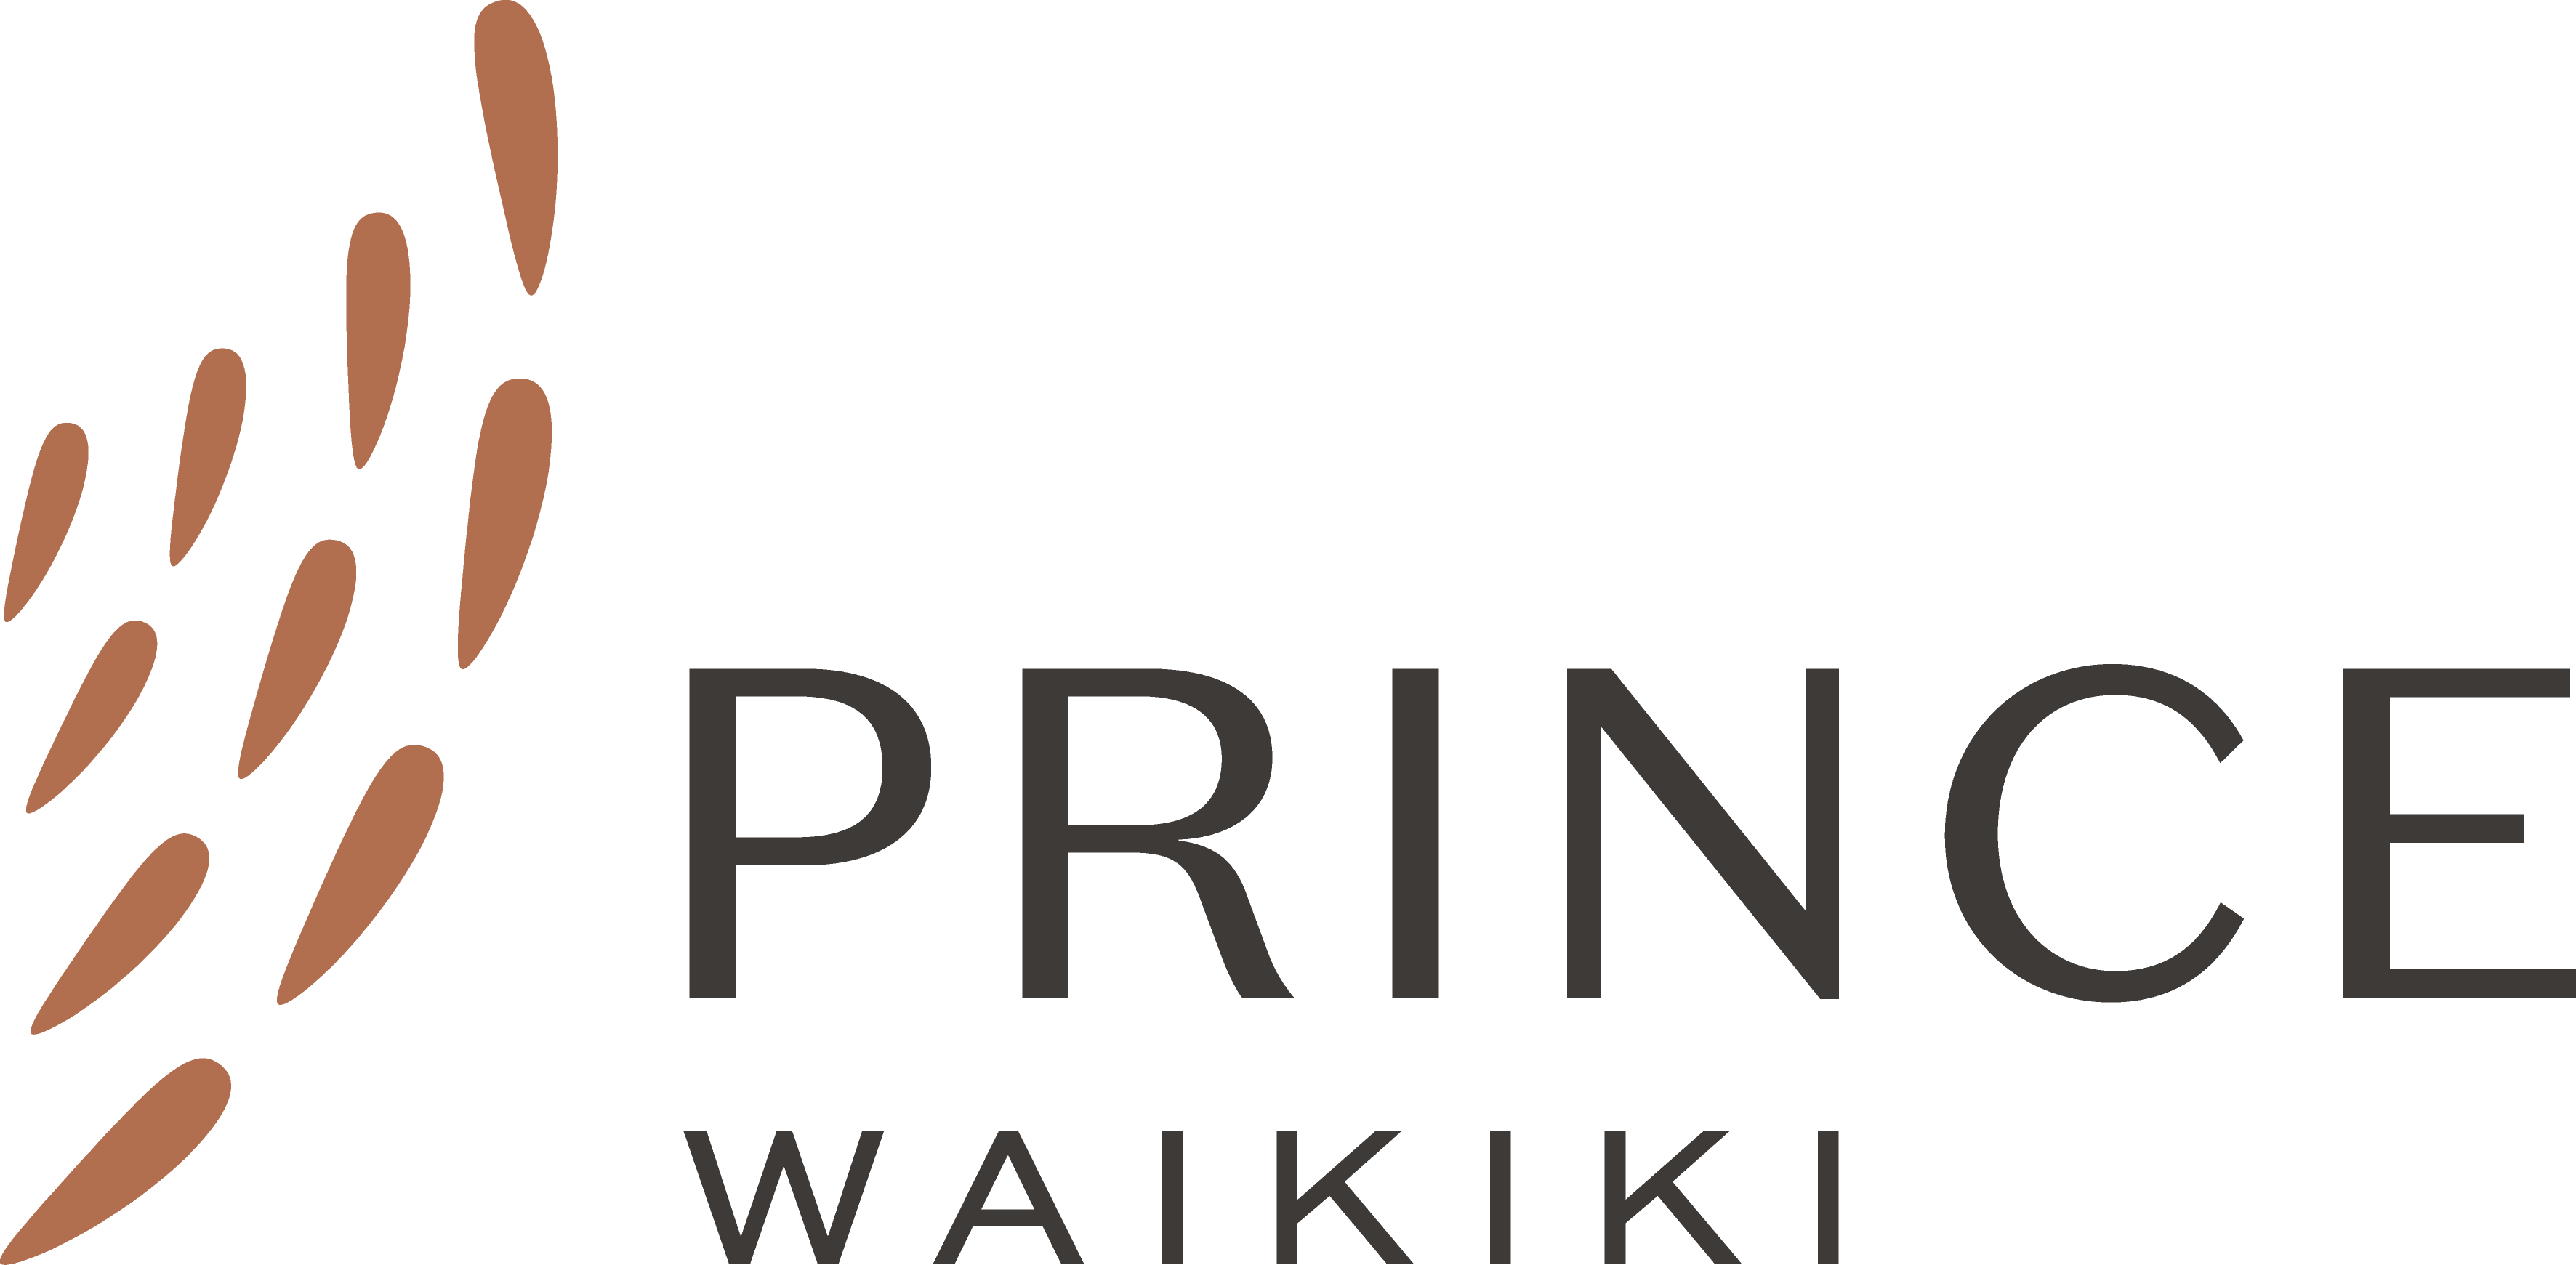 Image: The Prince Waikiki Joins the Hotel Employee Rate Program!